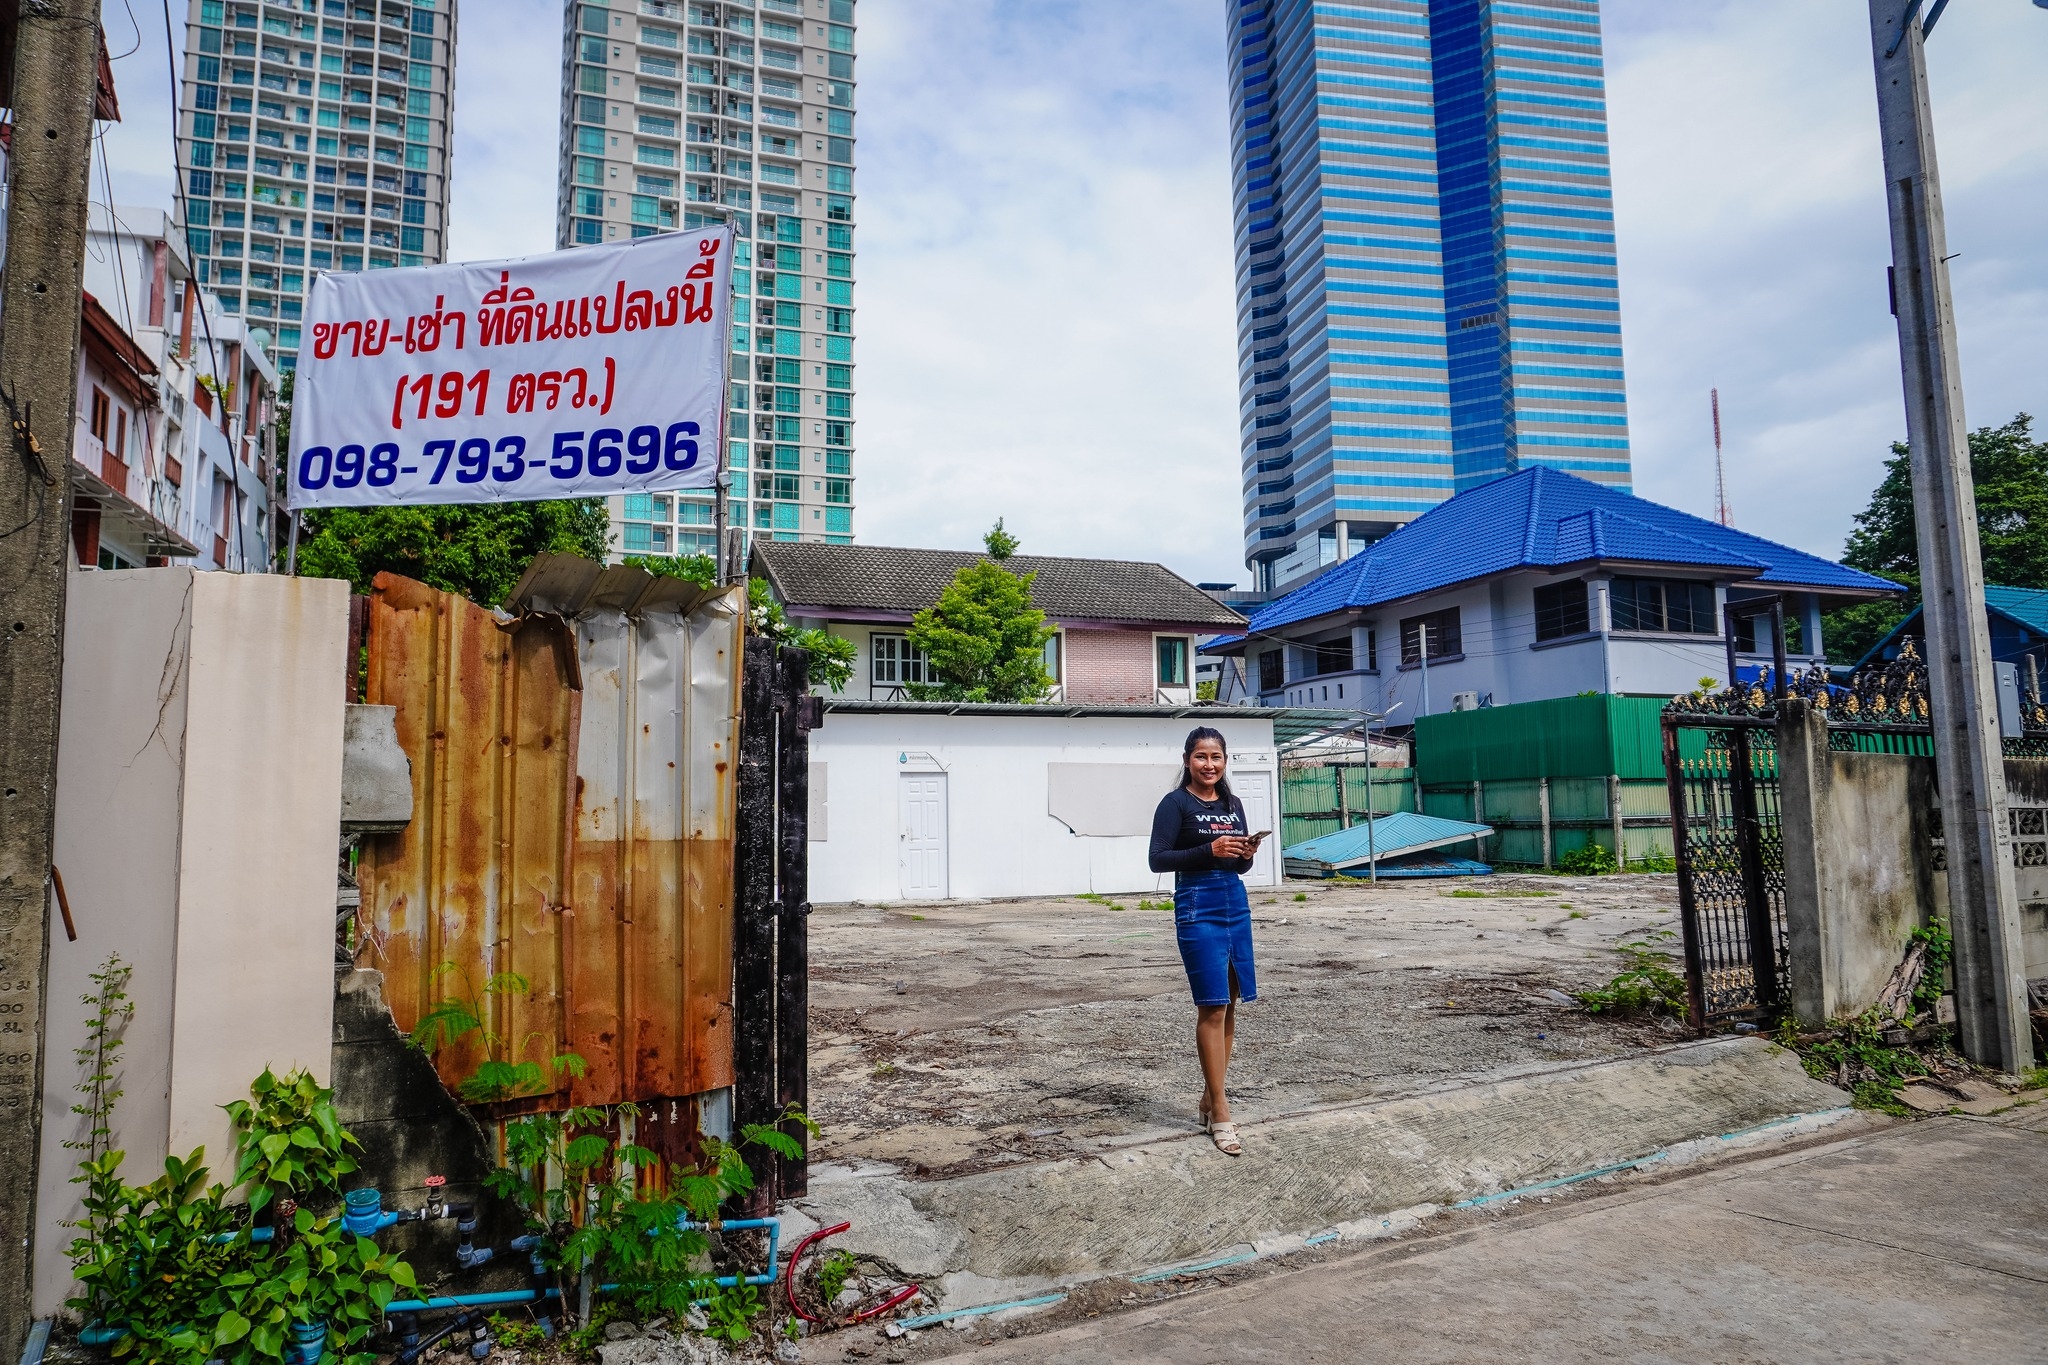 Land for Sale / Rent in Sukhumvit Soi 39. (Owners Post)